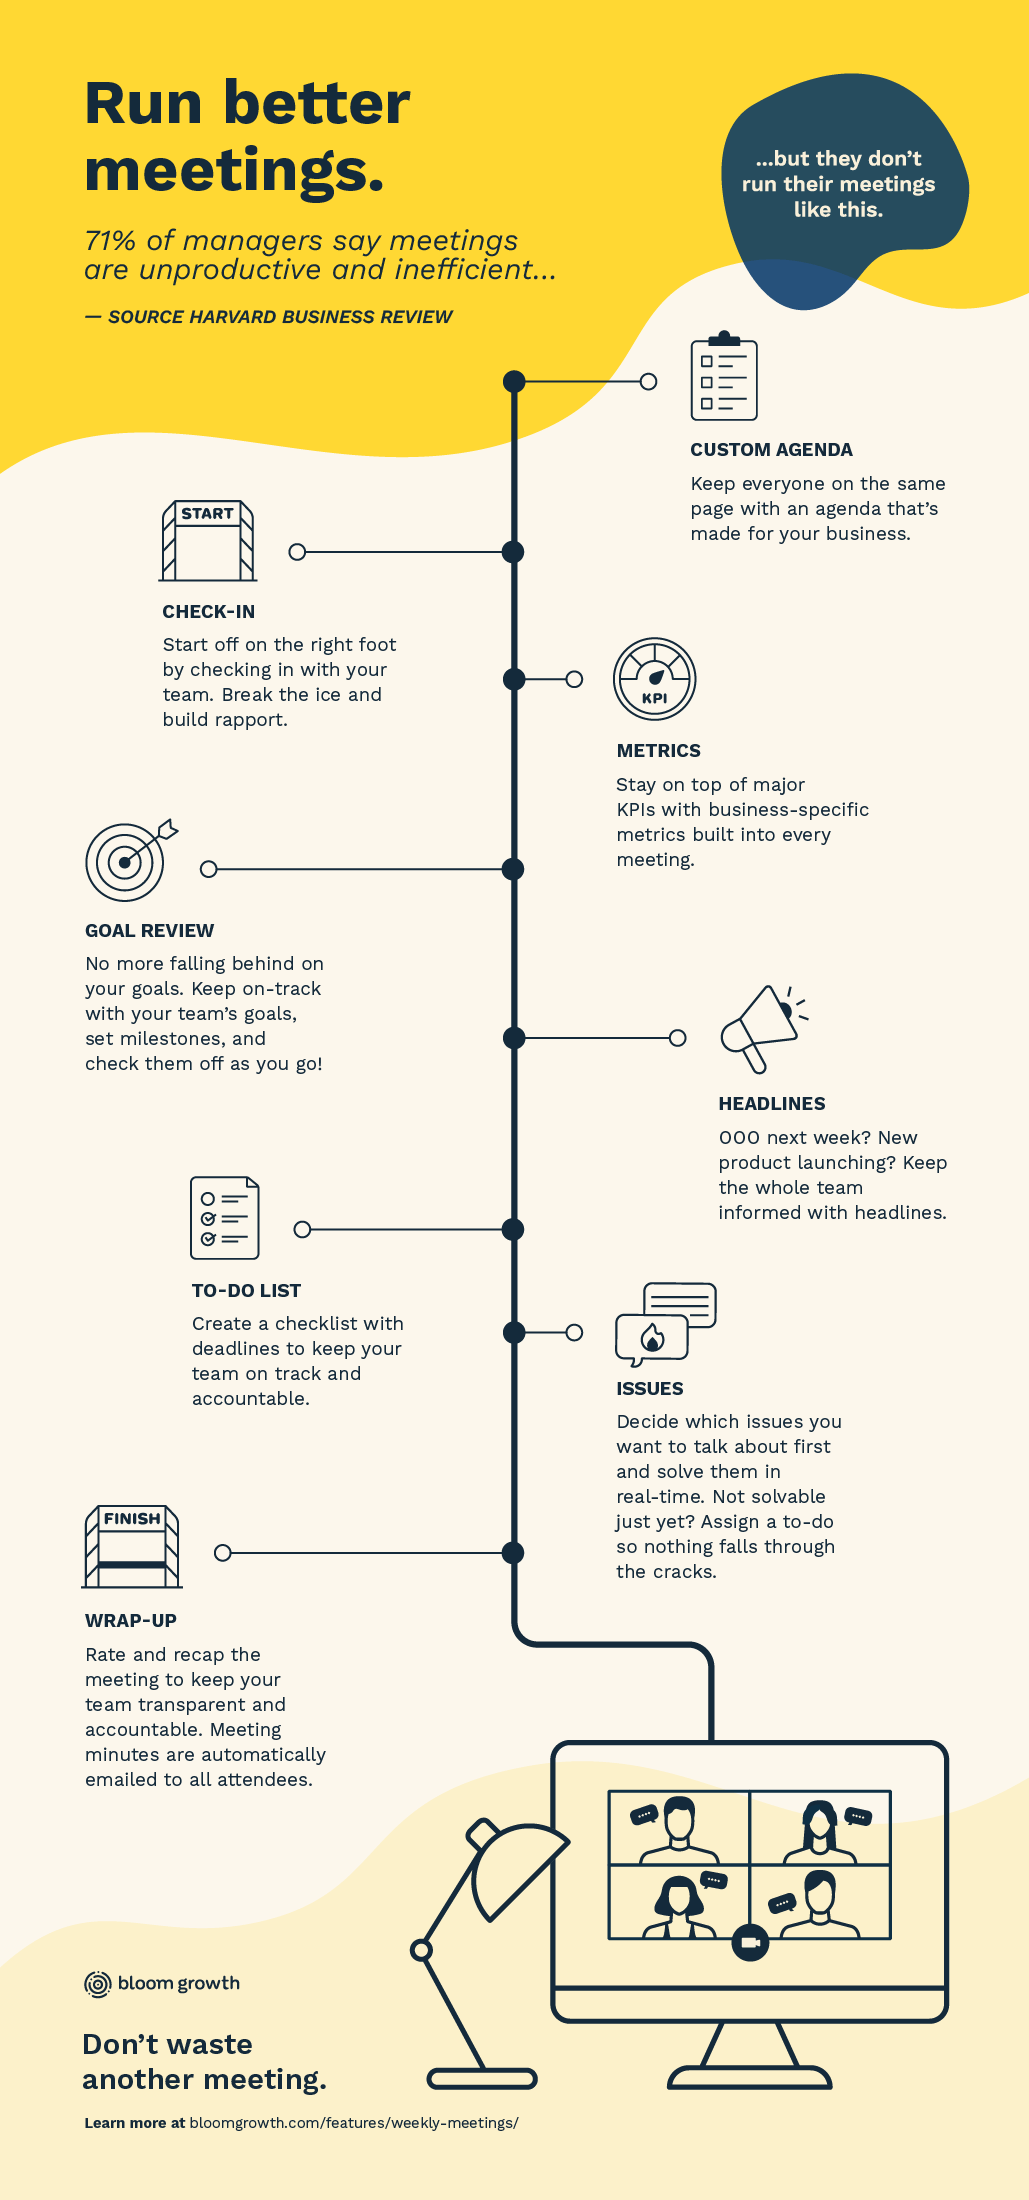 Infographic on how to run better meetings with Bloom Growth